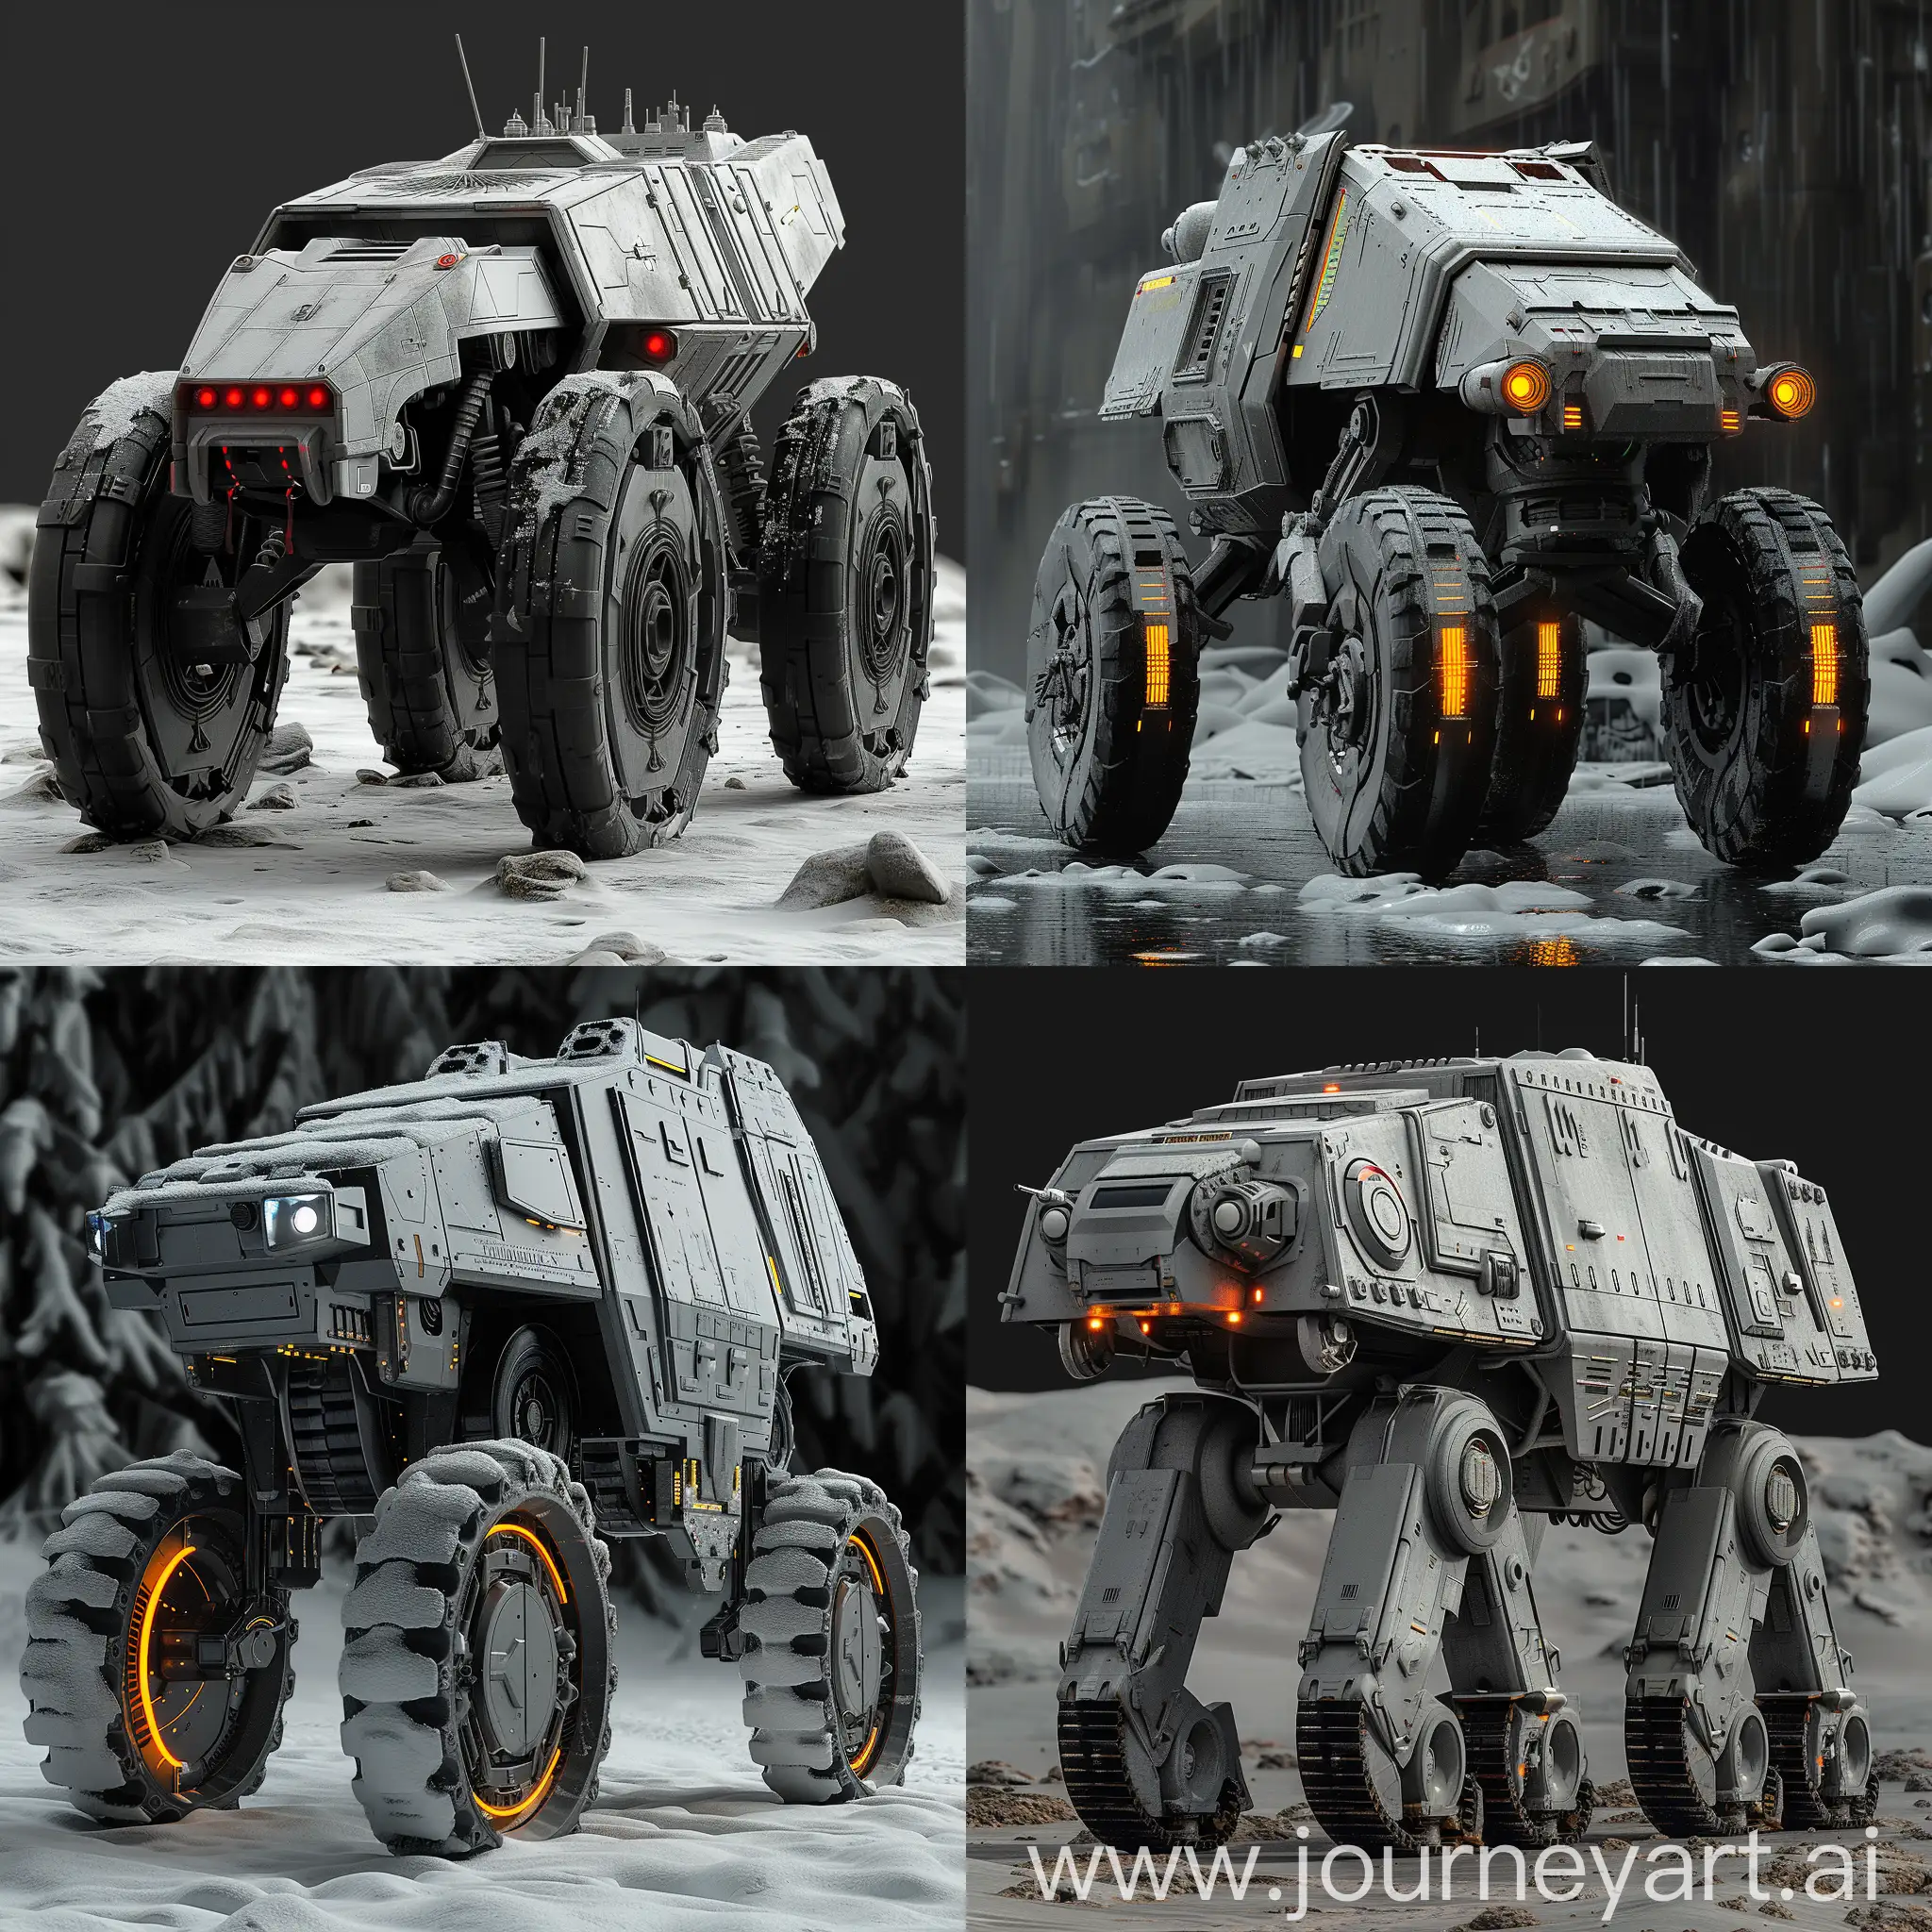 Futuristic All Terrain Armored Transport https://static.wikia.nocookie.net/starwars/images/1/16/AT-AT_2_Fathead.png/revision/latest/scale-to-width-down/1200?cb=20161108042721, Electric or hybrid propulsion system, Regenerative braking, Lightweight materials, Aerodynamic design, Solar panels, Energy-efficient tires, Intelligent energy management system, Energy recovery systems, Variable powertrain modes, Energy-efficient lighting, Autonomous driving capabilities, Augmented reality (AR) windshield display, Advanced communication systems, Self-healing armor, Advanced targeting systems, Adaptive suspension system, Energy shield technology, Drone deployment system, Biometric security system, Holographic display controls, Self-repairing armor, Nanoscale sensors, Nanocomposite materials, Nanoscale lubricants, Nanoscale camouflage, Nanoscale filtration system, Nanoscale energy storage, Nanoscale communication devices, Nanoscale actuators, Nanoscale stealth technology, Biometric authentication system, Bio-inspired design, Bioluminescent lighting, Bioregenerative systems, Biomechanical enhancements, Bio-sensors for health monitoring, Bio-inspired camouflage, Bioengineered armor, Bio-mimetic sensors, Biodegradable components, octane render --stylize 1000